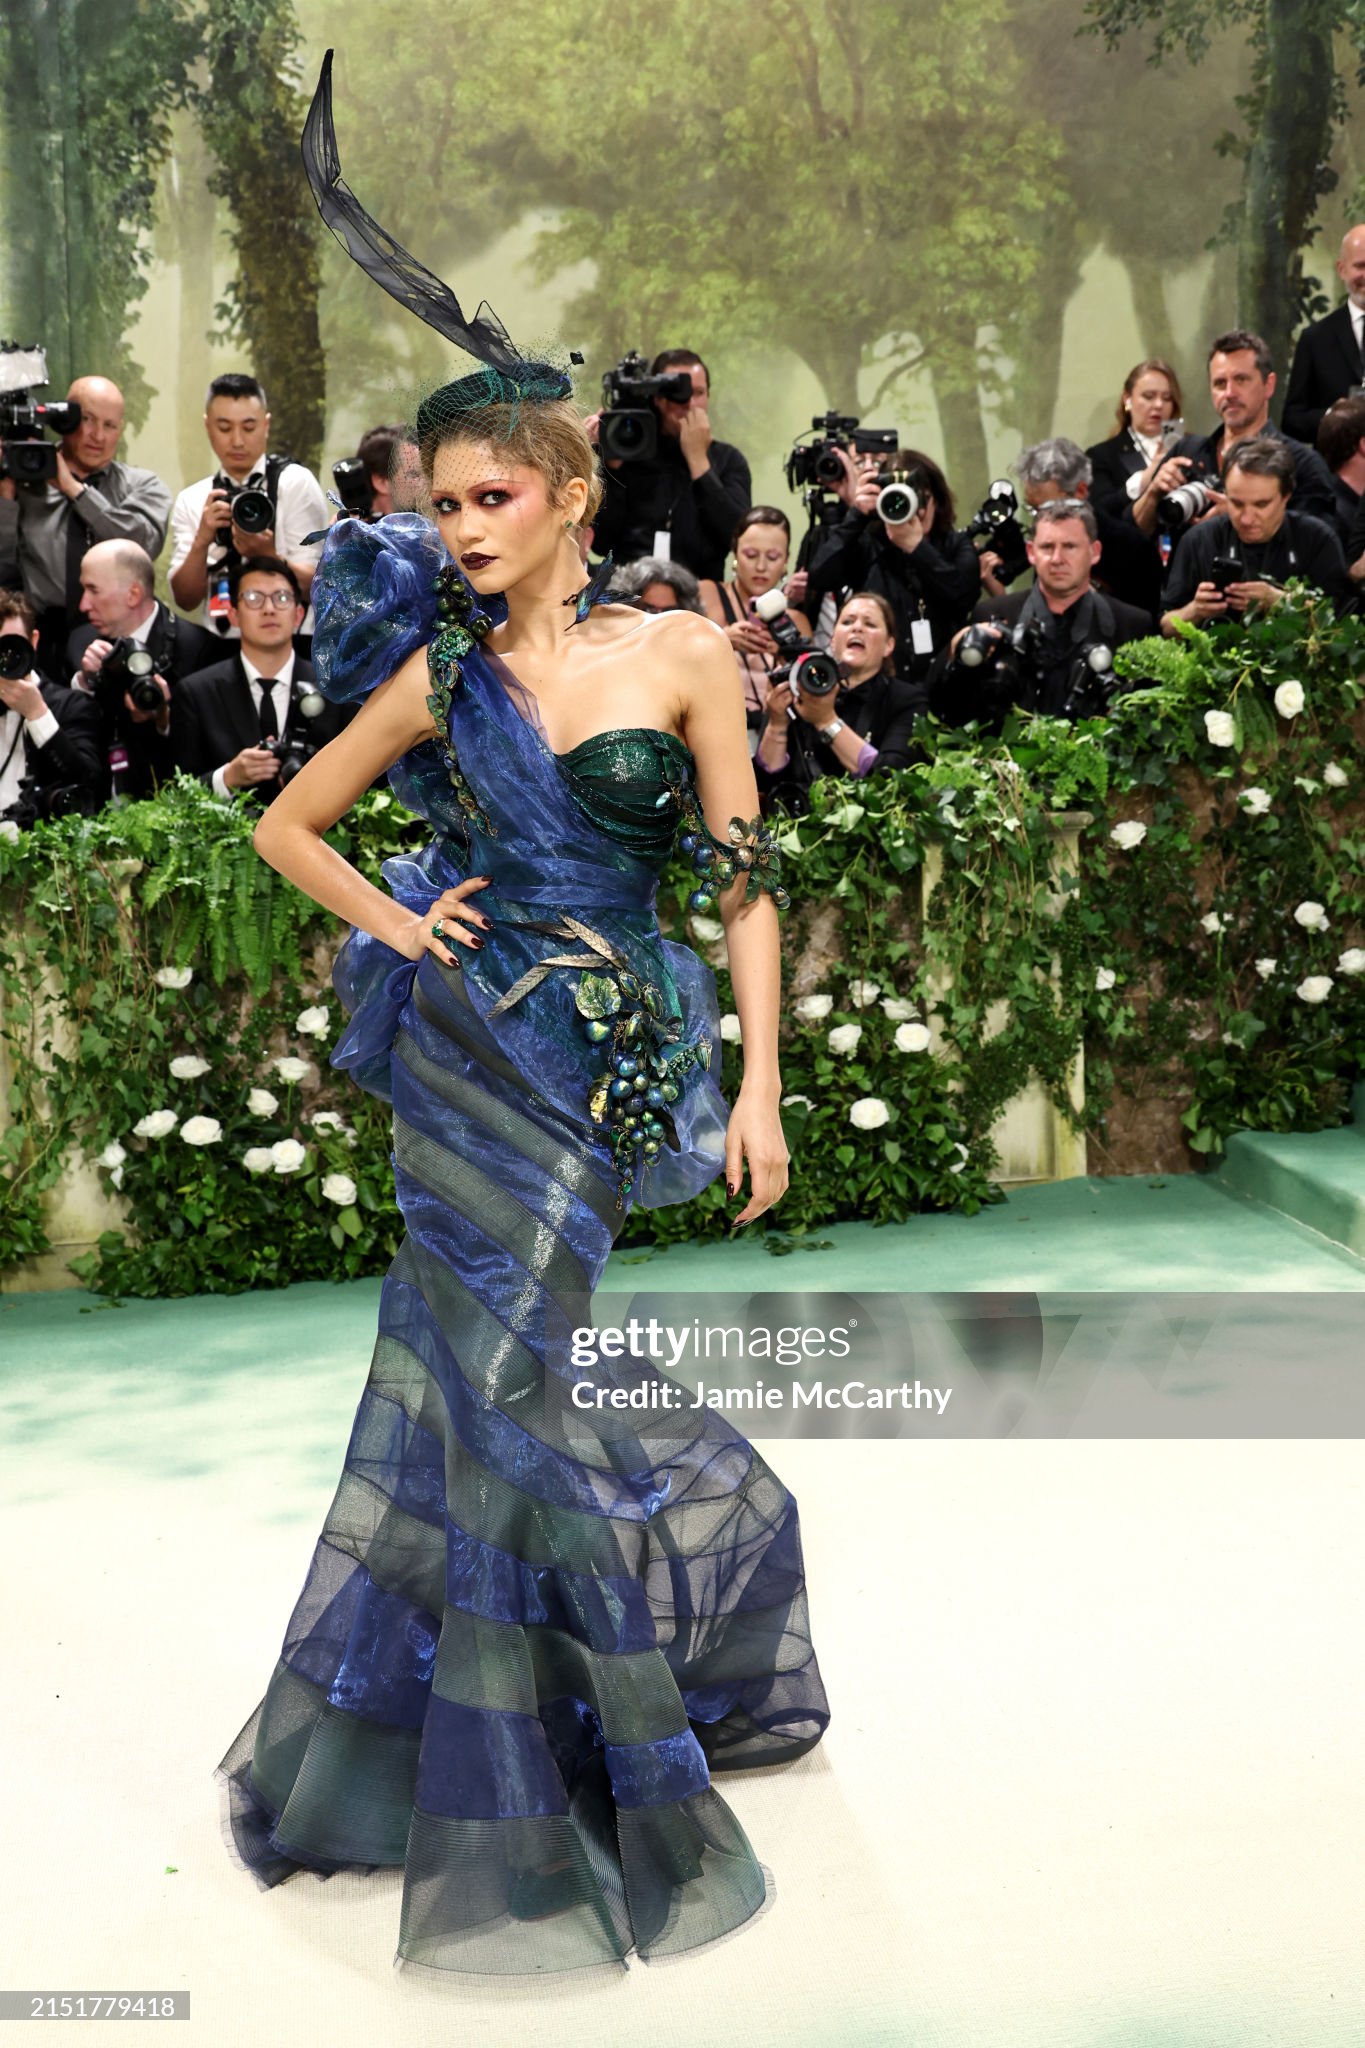 gettyimages-2151779418-2048x2048.jpg